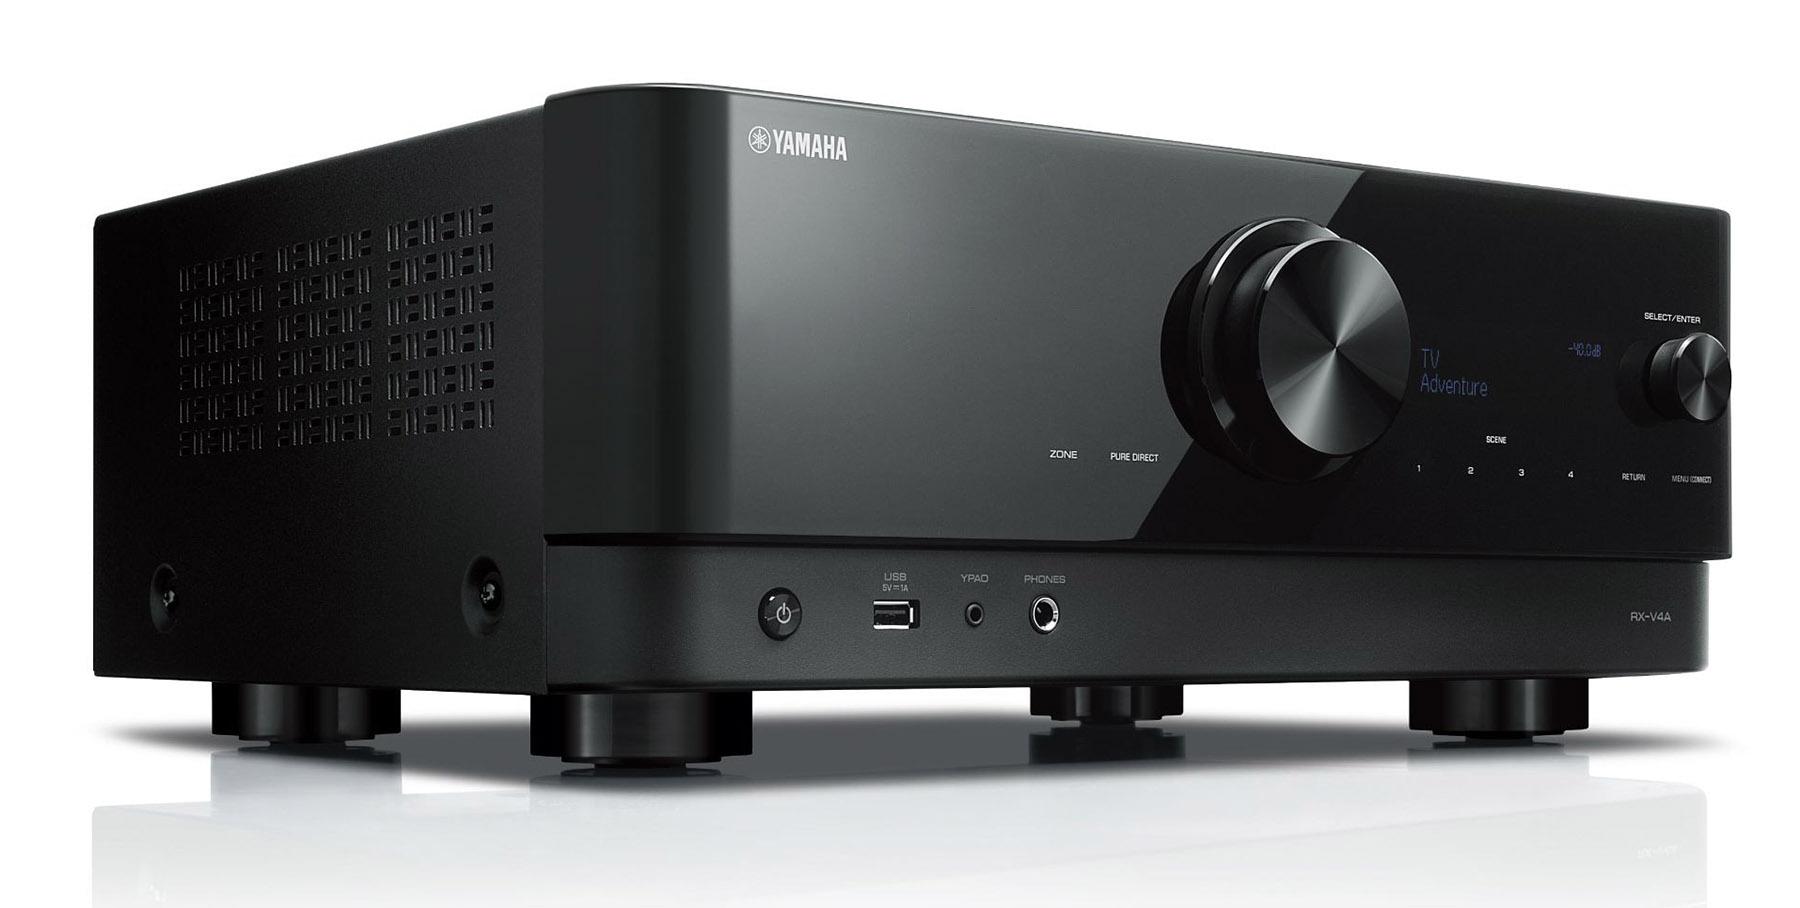 The least expensive of Yamaha’s new generation of AV receivers has features and performance that once cost thousands, and some that will keep it current for years. Audyssey 3133f26b yahamarx v4afront